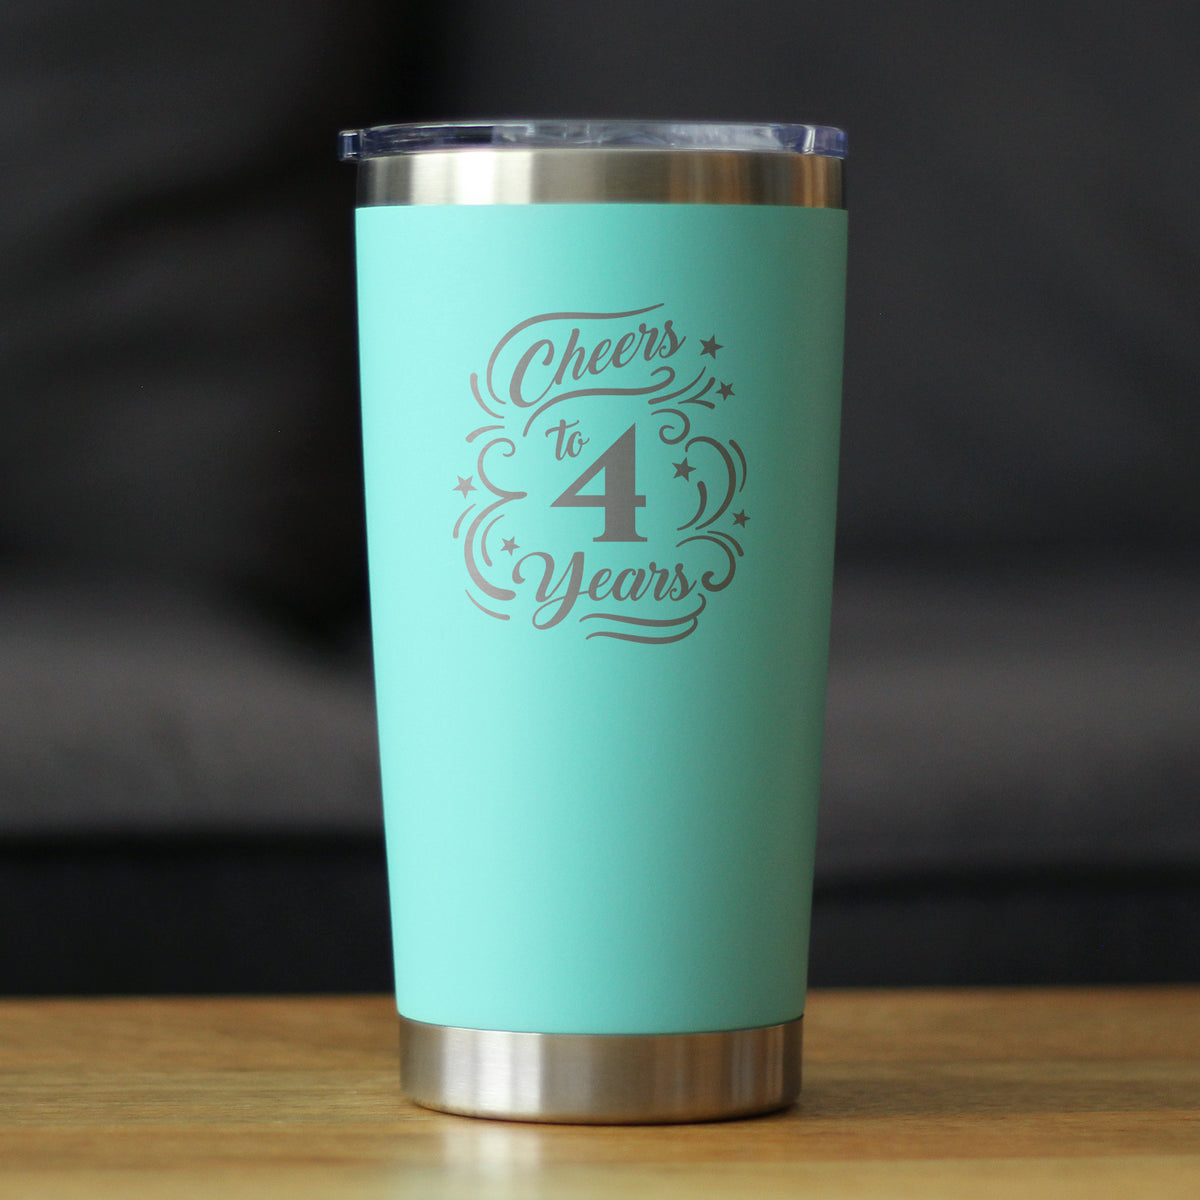 Cheers to 4 Years - Insulated Coffee Tumbler Cup with Sliding Lid - Stainless Steel Insulated Mug - 4th Anniversary Gifts and Party Decor